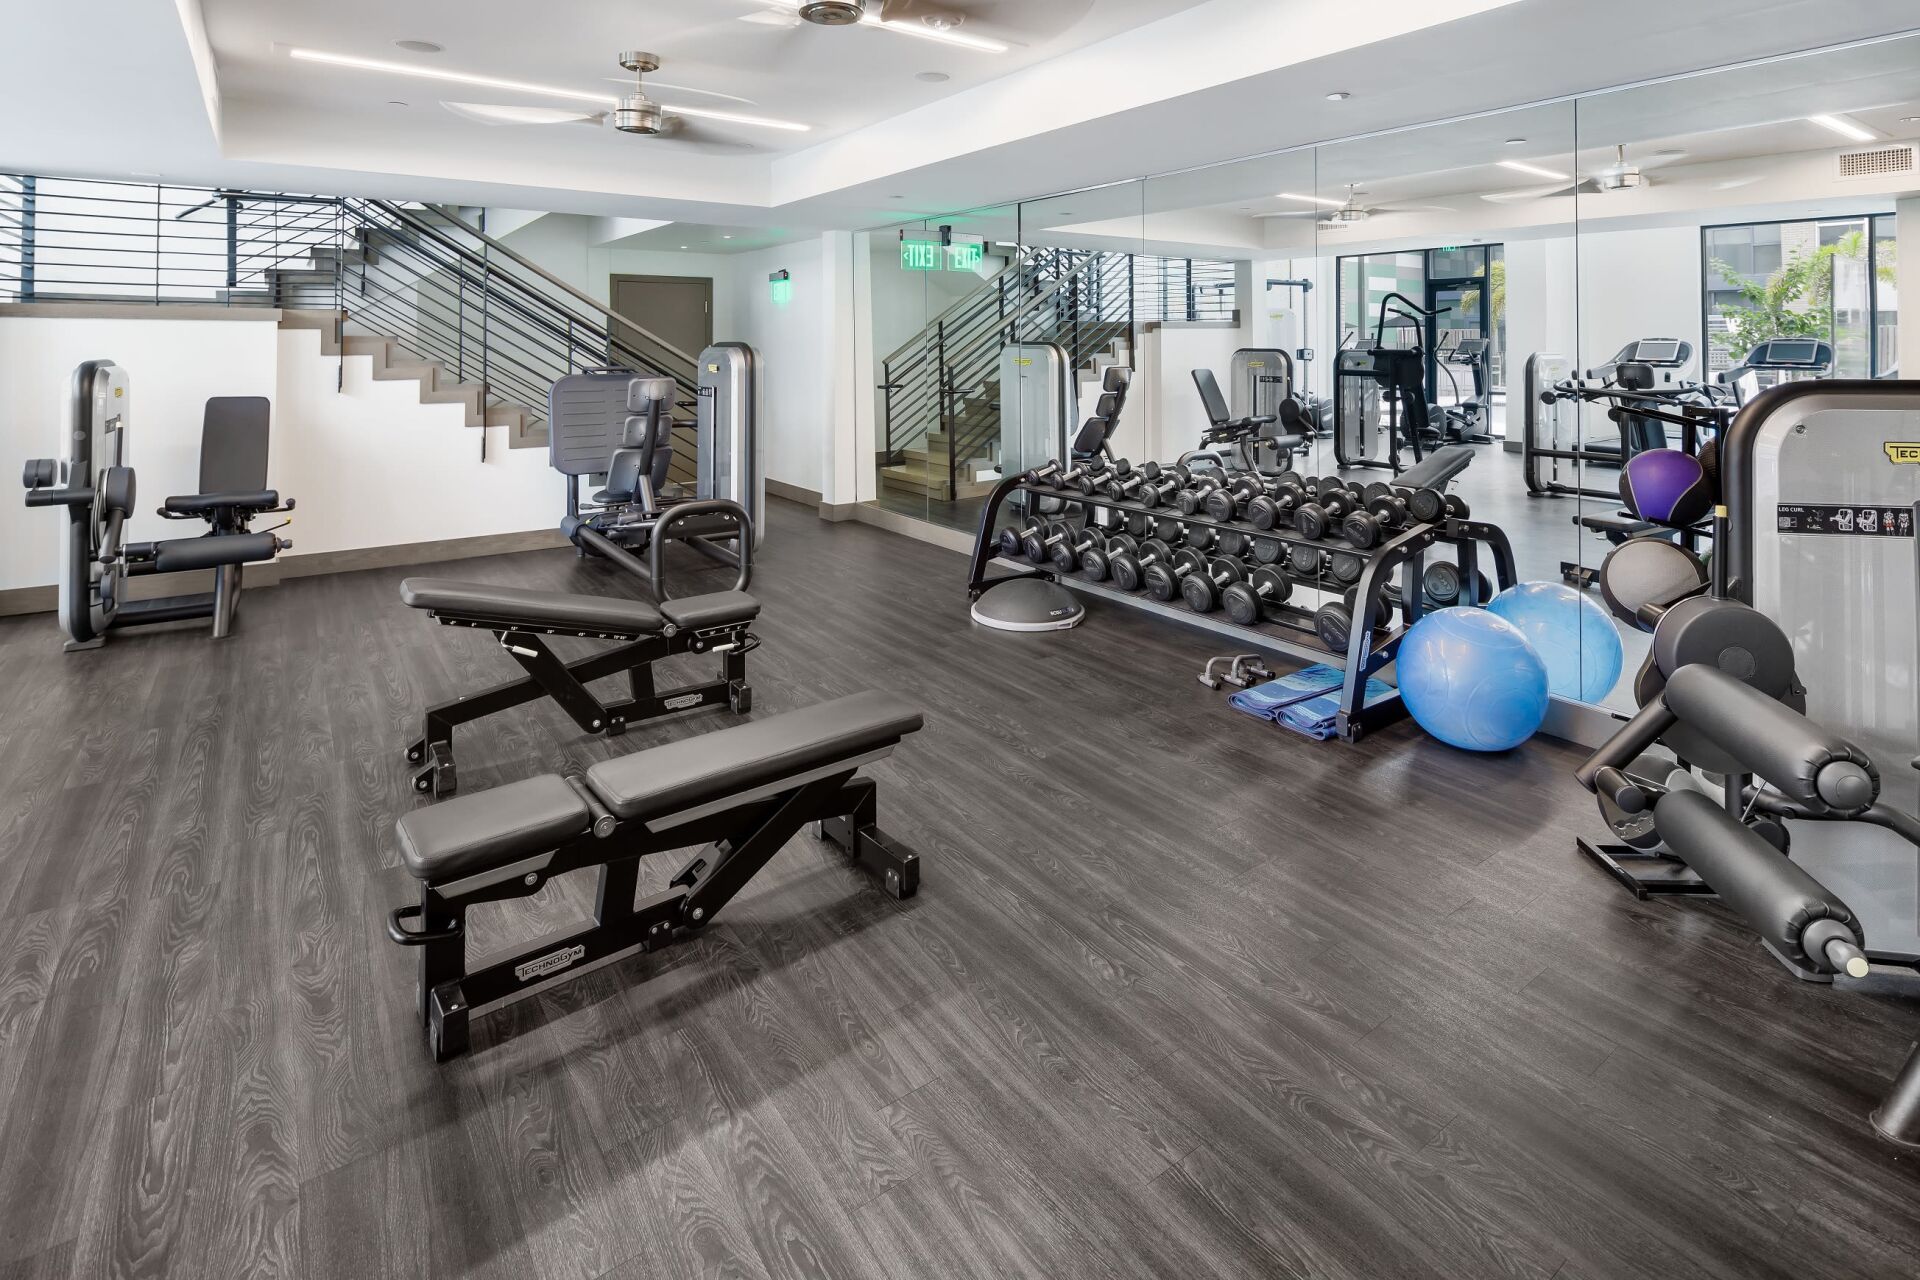 Central Station on Orange | Fitness Center with Weights and Bench